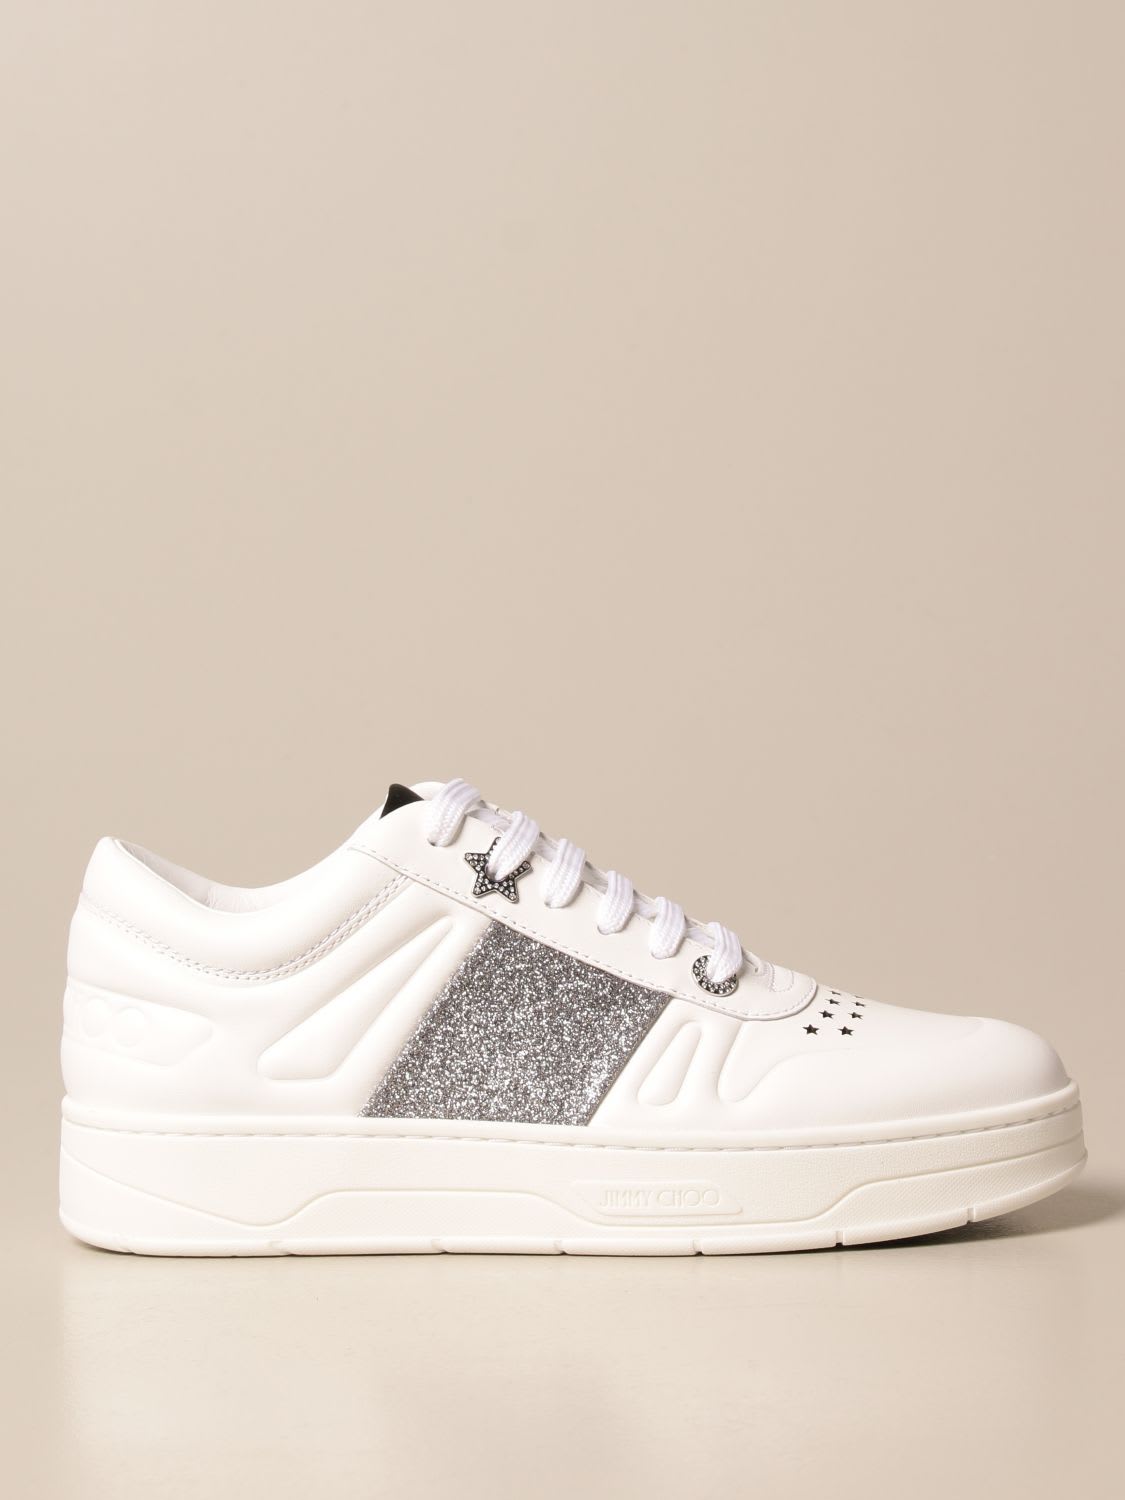 Buy Jimmy Choo Sneakers Hawaii Jimmy Choo Sneakers In Real Leather online, shop Jimmy Choo shoes with free shipping